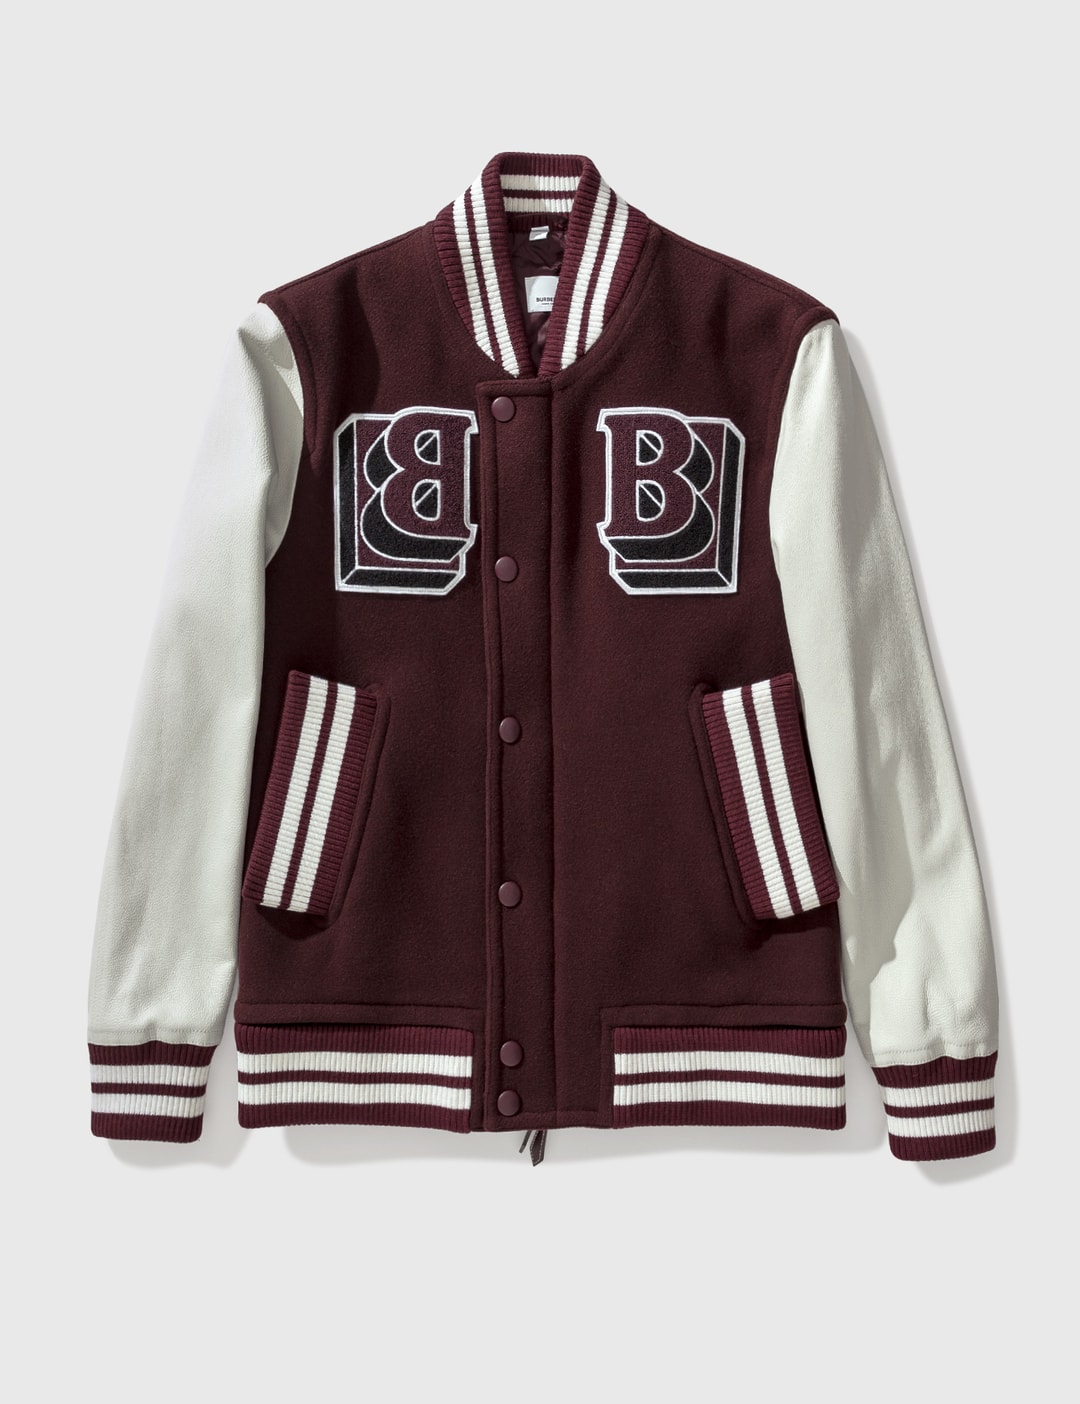 Burberry - Runway Bomber Jacket | HBX - Globally Curated Fashion and Lifestyle by